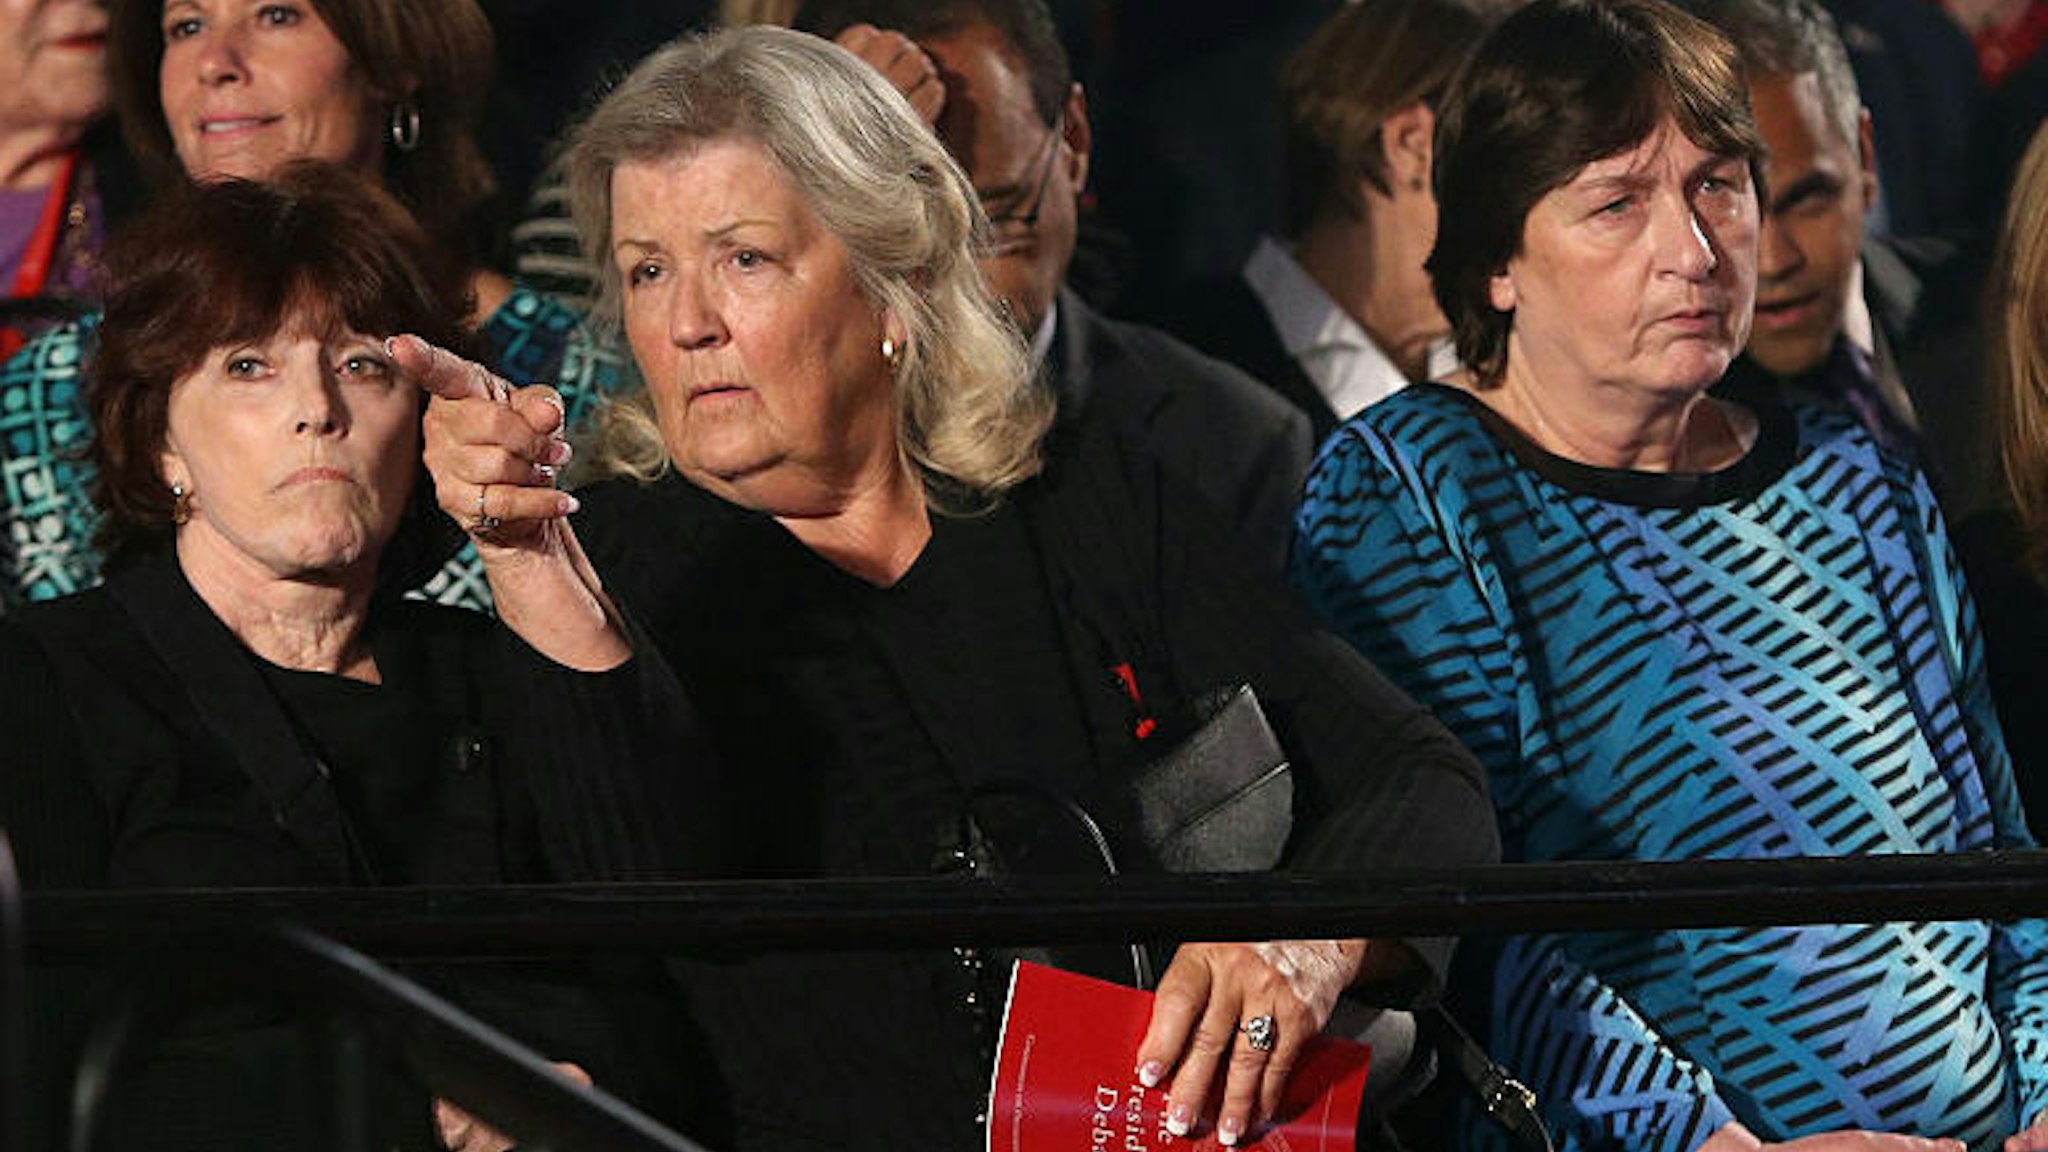 Three of the four woman who sat with Donald Trump in a press conference and made several accusations against Bill and Hillary Clinton -- Kathleen Wiley (left), Juanita Broaddrick (center), and Kathy Shelton -- attend the presidential debate on Sunday, Oct. 9, 2016 at Washington University in St. Louis, Mo.